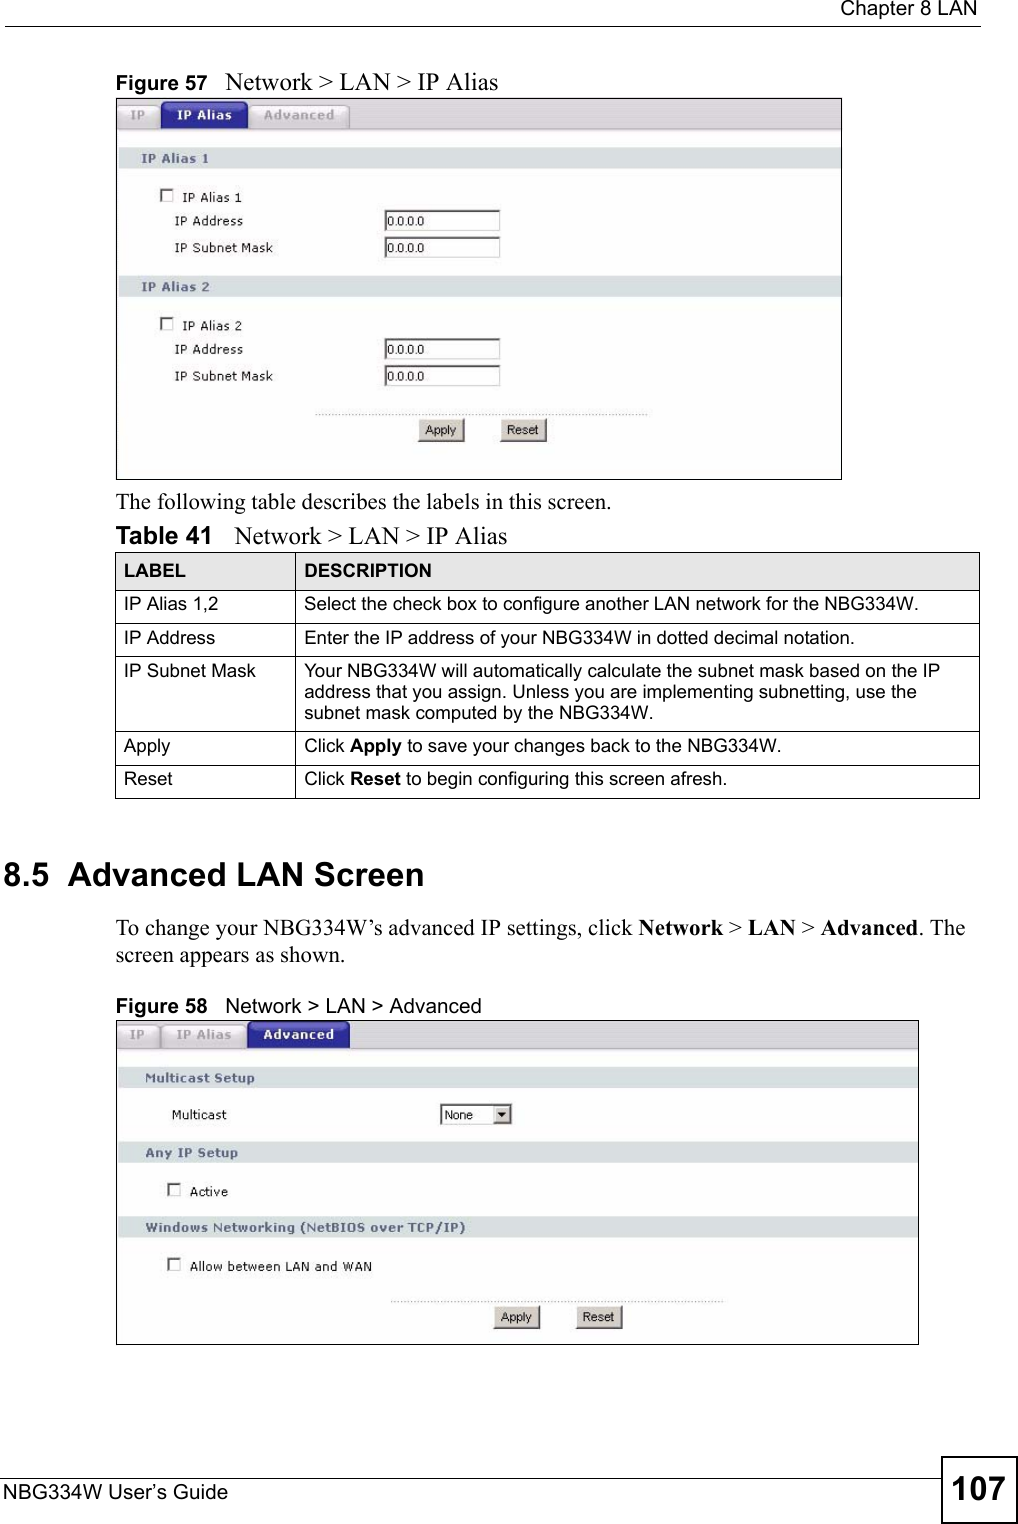  Chapter 8 LANNBG334W User’s Guide 107Figure 57   Network &gt; LAN &gt; IP Alias The following table describes the labels in this screen.8.5  Advanced LAN ScreenTo change your NBG334W’s advanced IP settings, click Network &gt; LAN &gt; Advanced. The screen appears as shown.Figure 58   Network &gt; LAN &gt; Advanced   Table 41   Network &gt; LAN &gt; IP AliasLABEL DESCRIPTIONIP Alias 1,2 Select the check box to configure another LAN network for the NBG334W.IP Address Enter the IP address of your NBG334W in dotted decimal notation. IP Subnet Mask Your NBG334W will automatically calculate the subnet mask based on the IP address that you assign. Unless you are implementing subnetting, use the subnet mask computed by the NBG334W.Apply Click Apply to save your changes back to the NBG334W.Reset Click Reset to begin configuring this screen afresh.